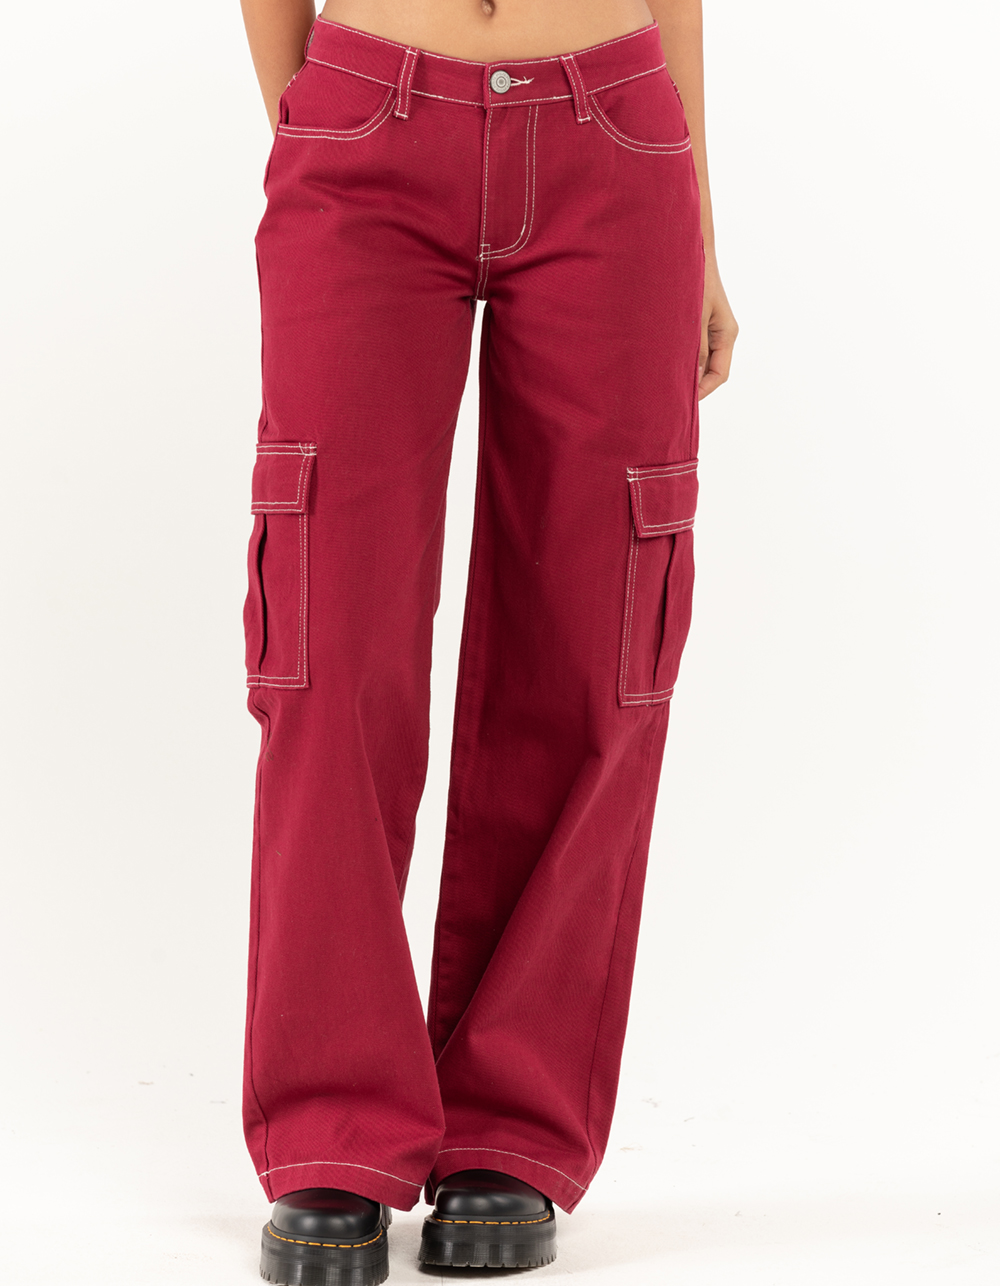 Details more than 90 red cargo pants best - in.eteachers